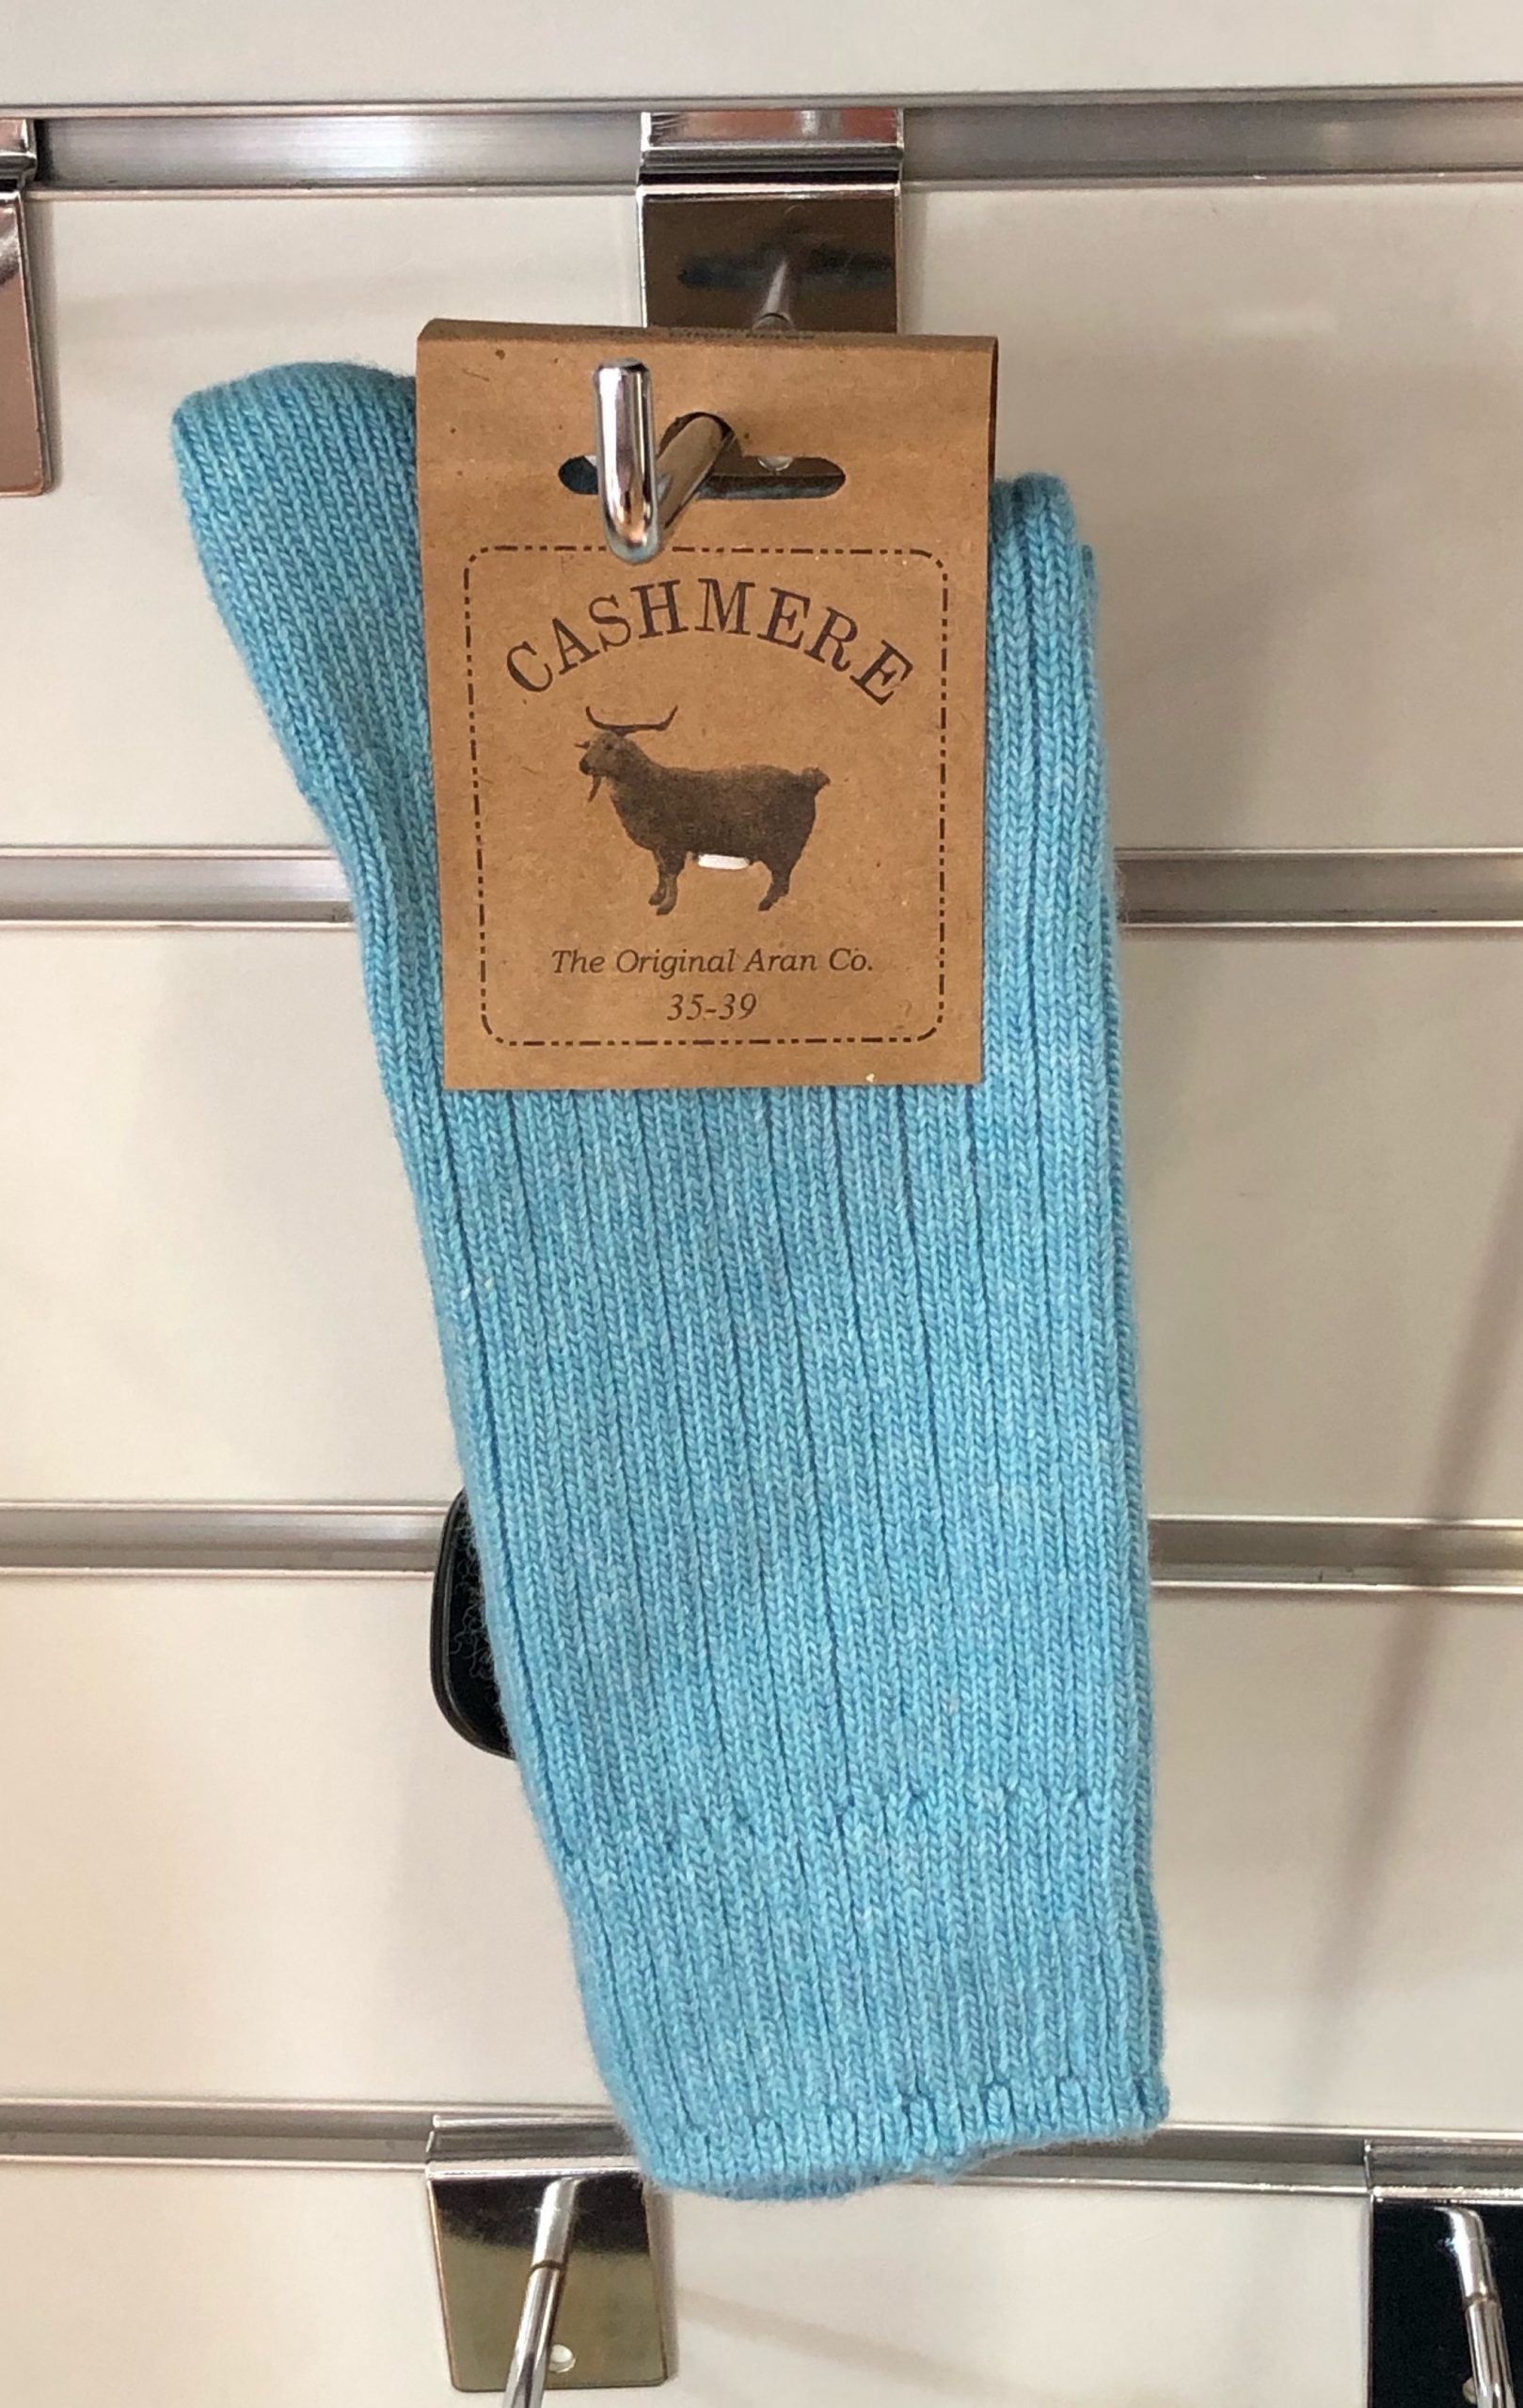 Cashmere and Wool Light Blue Socks in Size 3-7